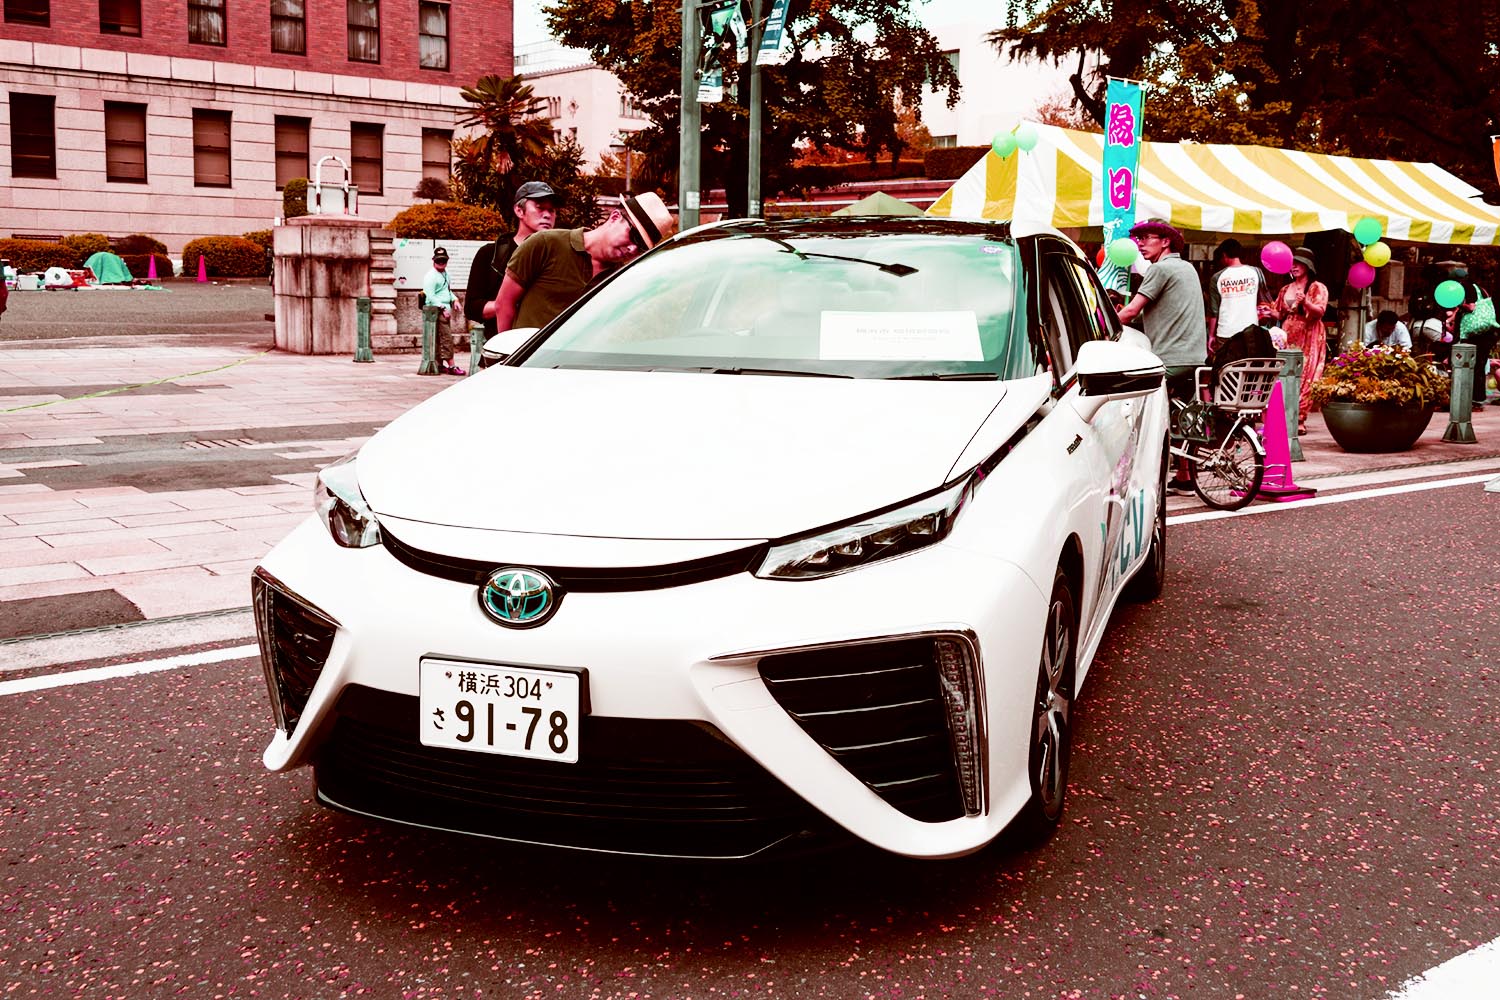 TOYOTA TALKS ABOUT FUEL-CELL TECHNOLOGY